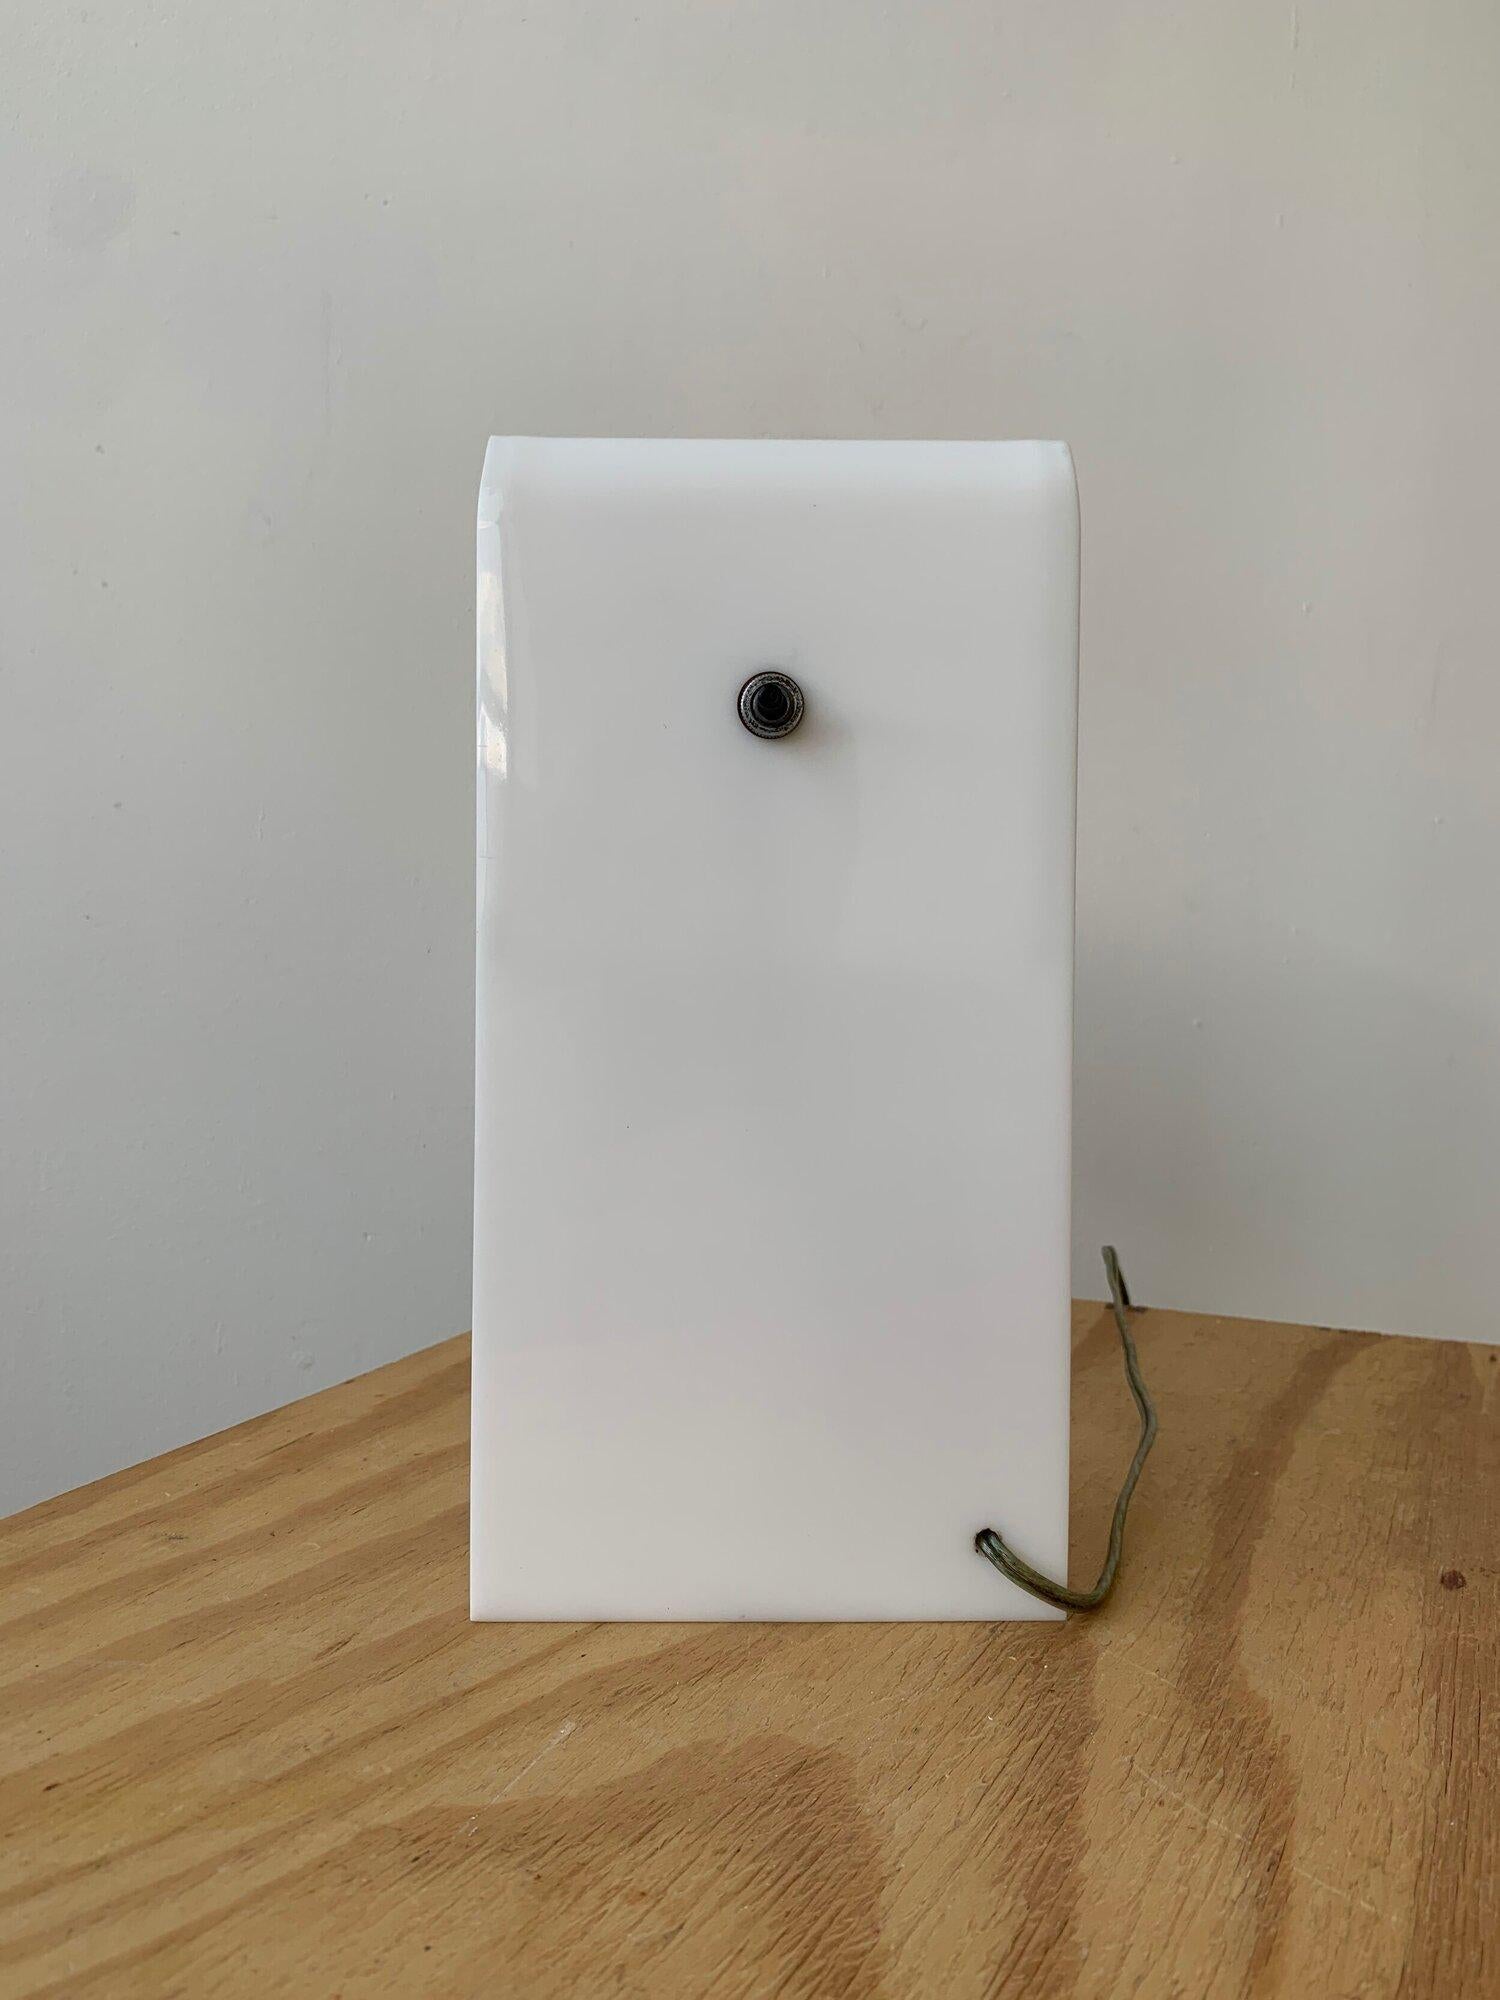 Lucite Vintage Molded White Plexiglass Lamp Designed by Neal Small, Circa 1965 For Sale